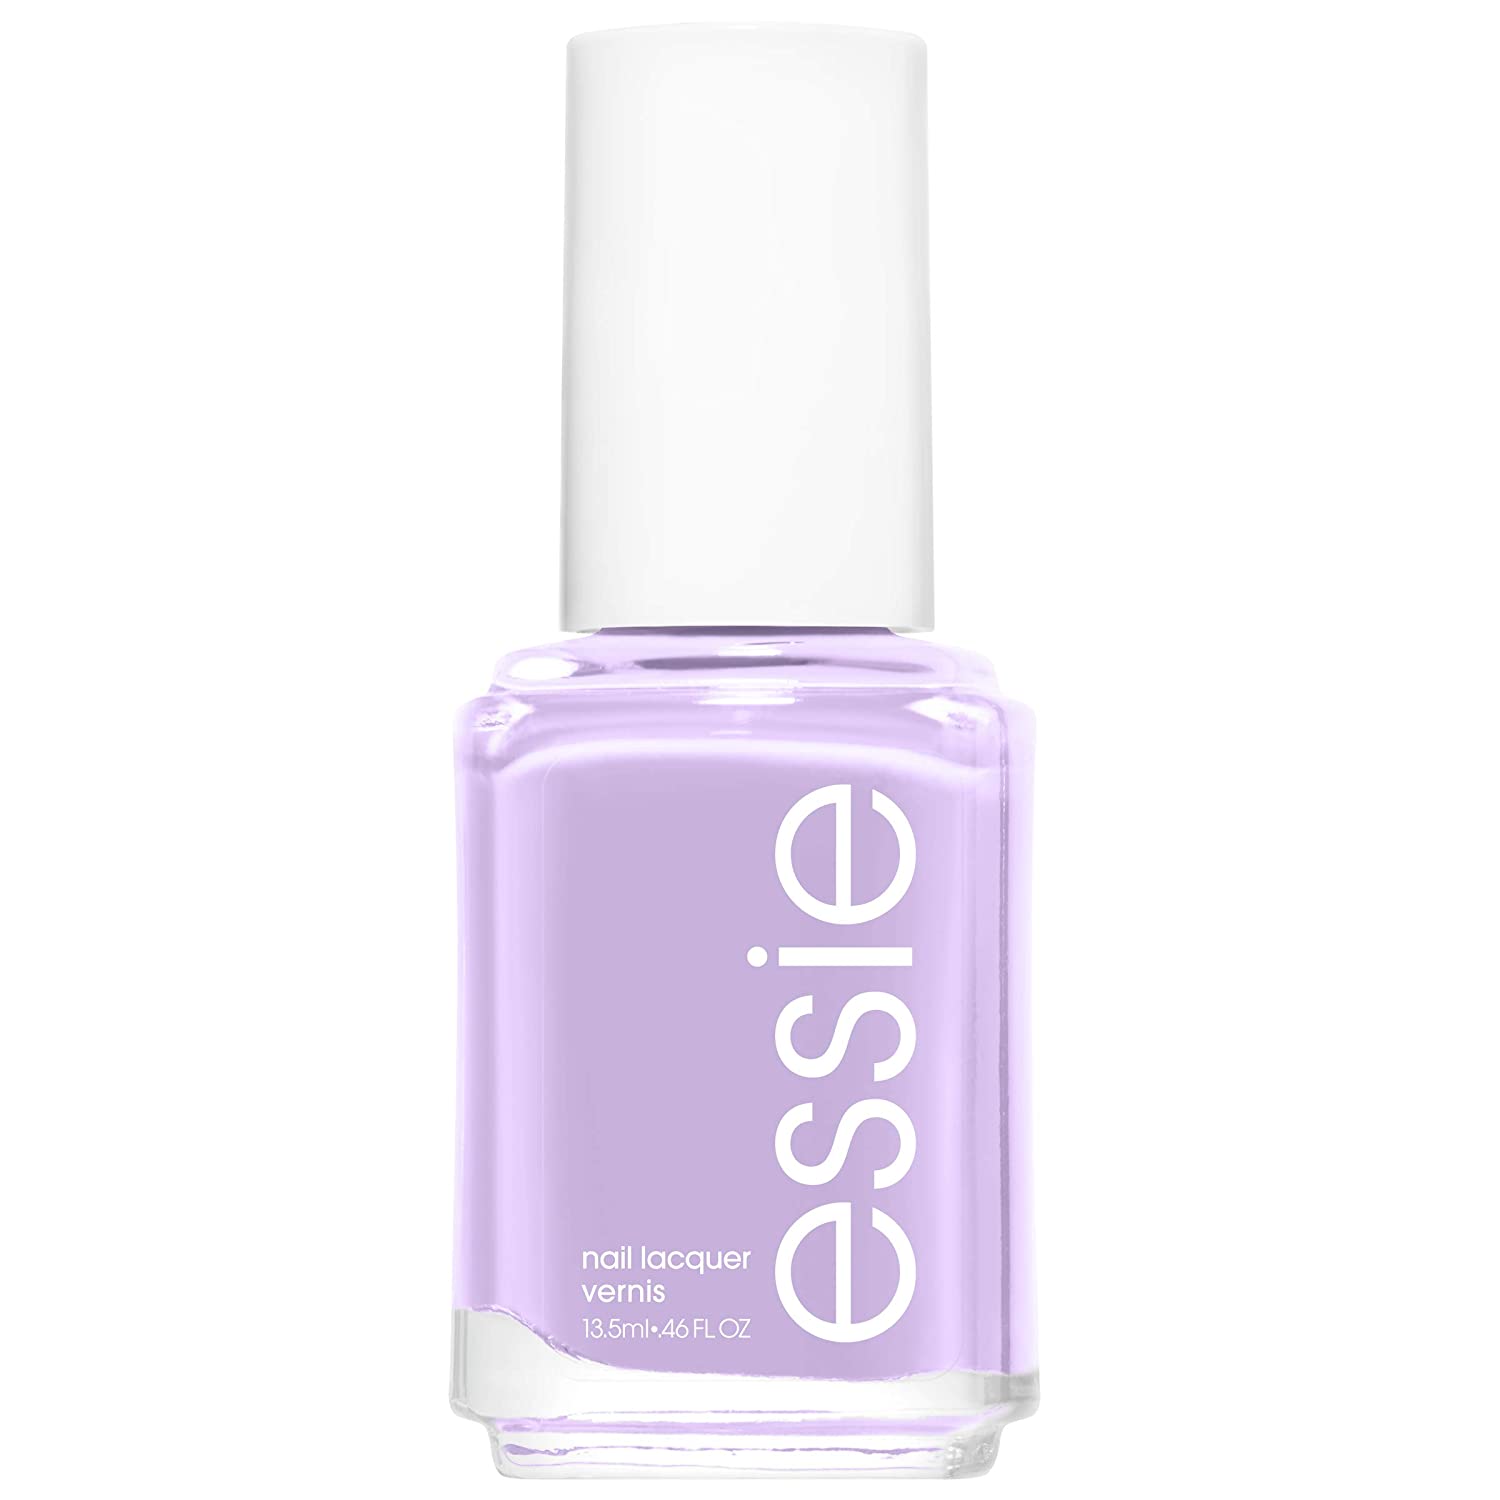 Essie nail polish in Lilacism